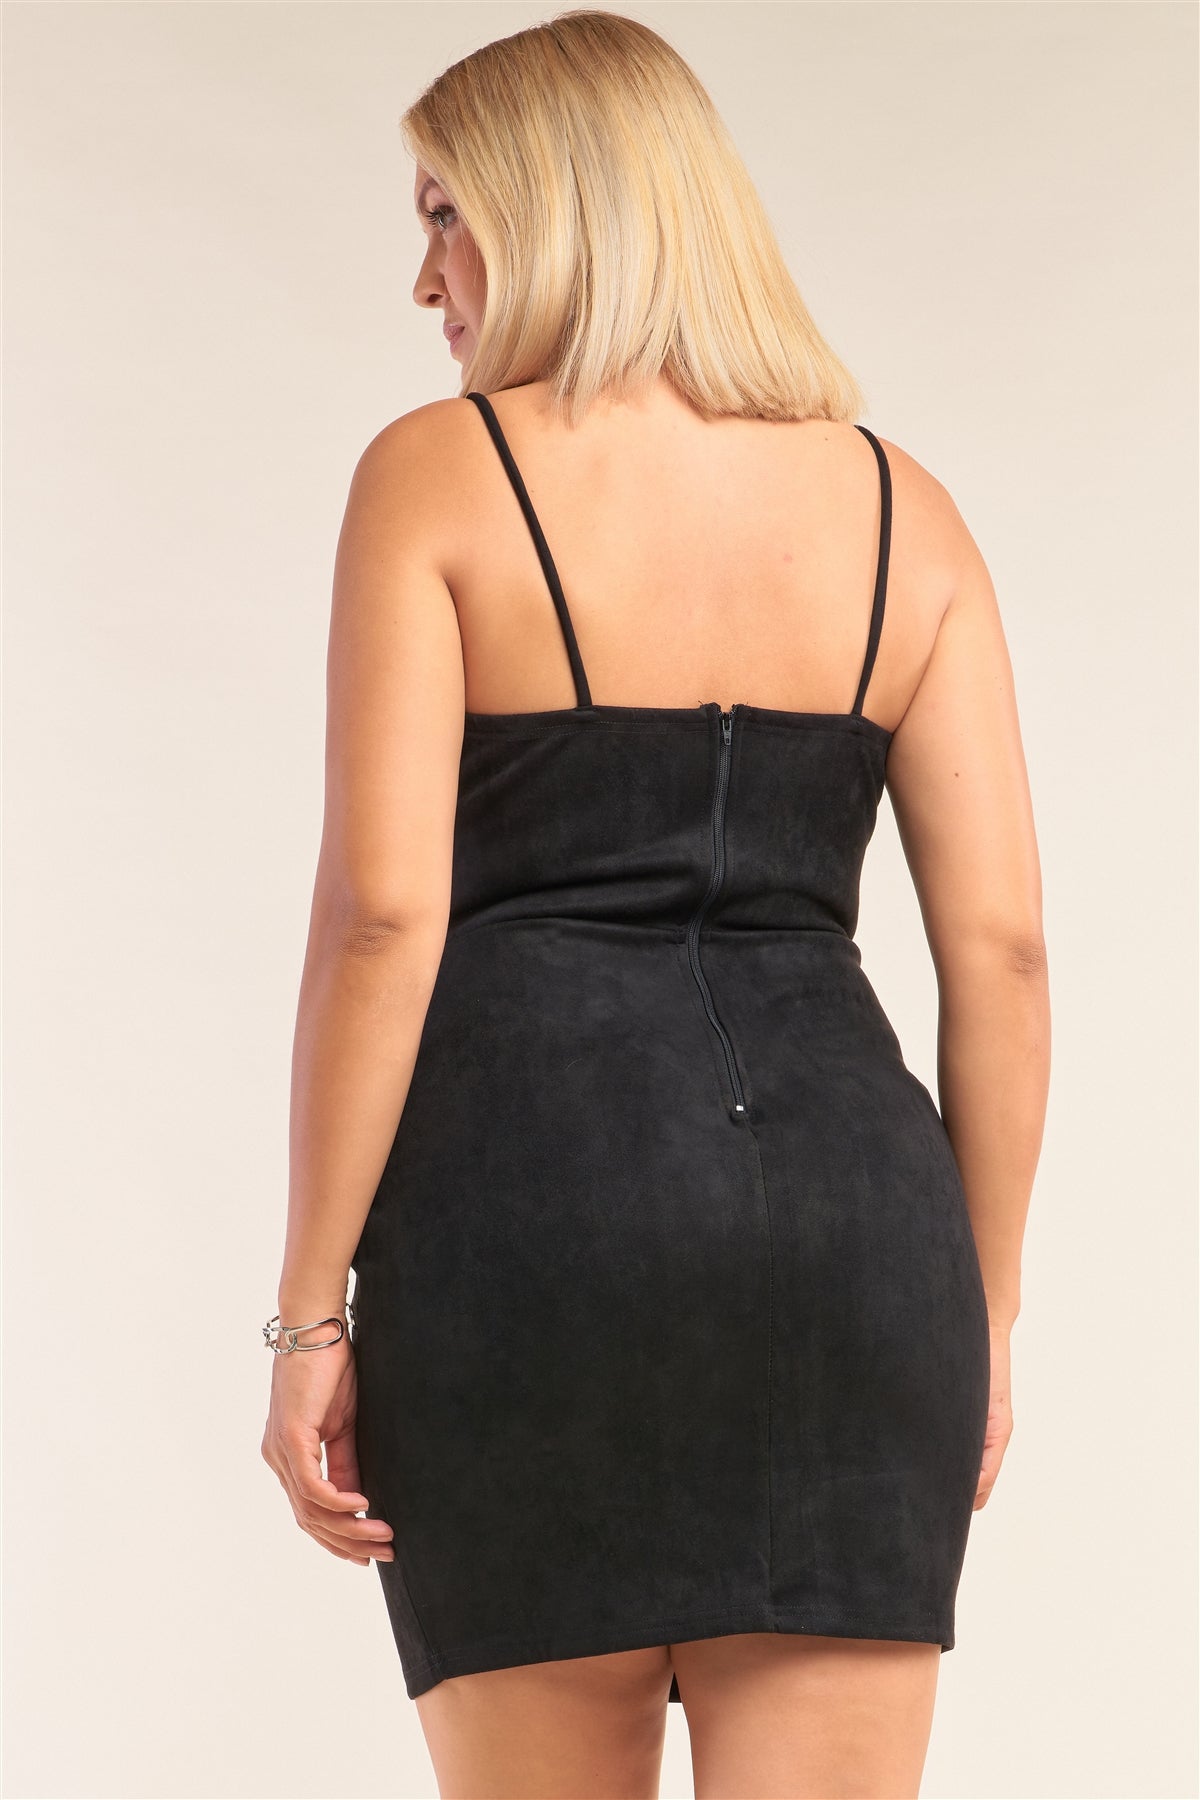 Plus Size Suede Sleeveless Fitted Square Neck Mini Dress